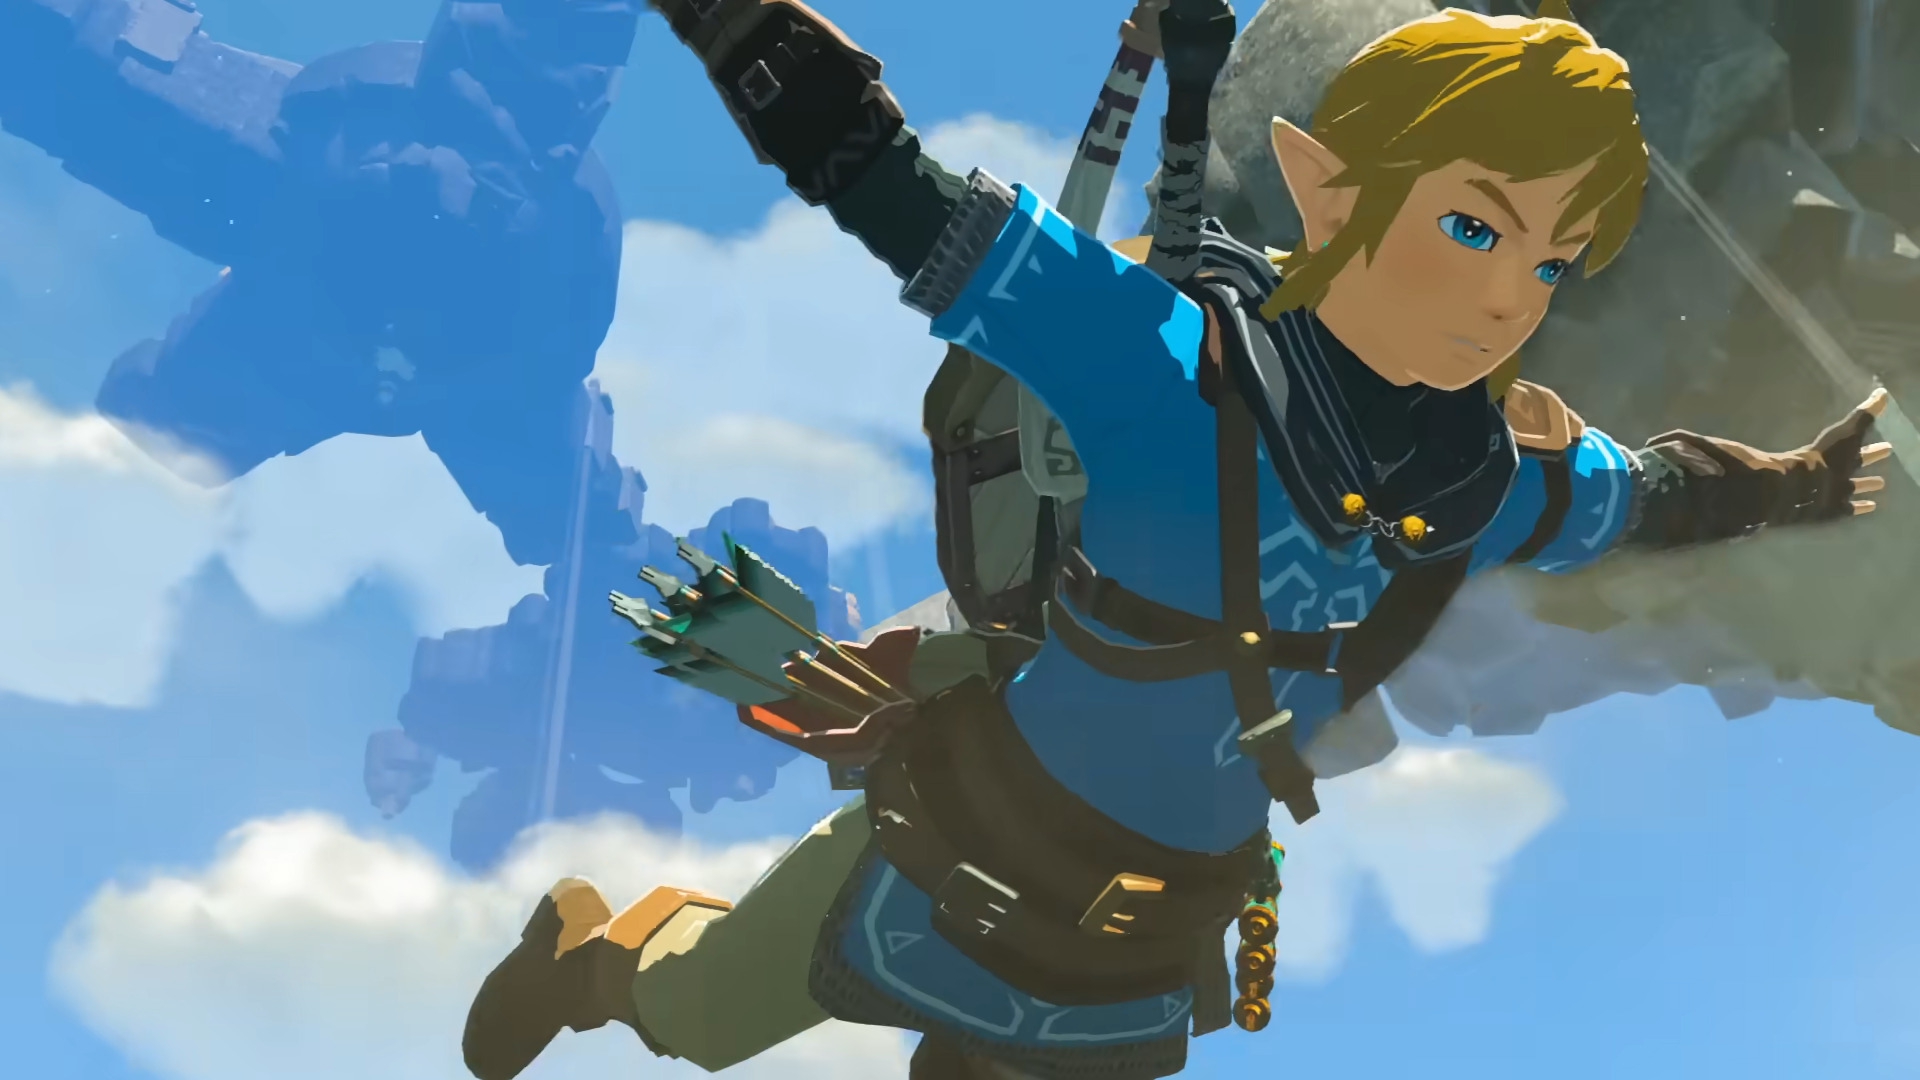 Link skydiving. A structure in the clouds above him appears to have bridges between buildings